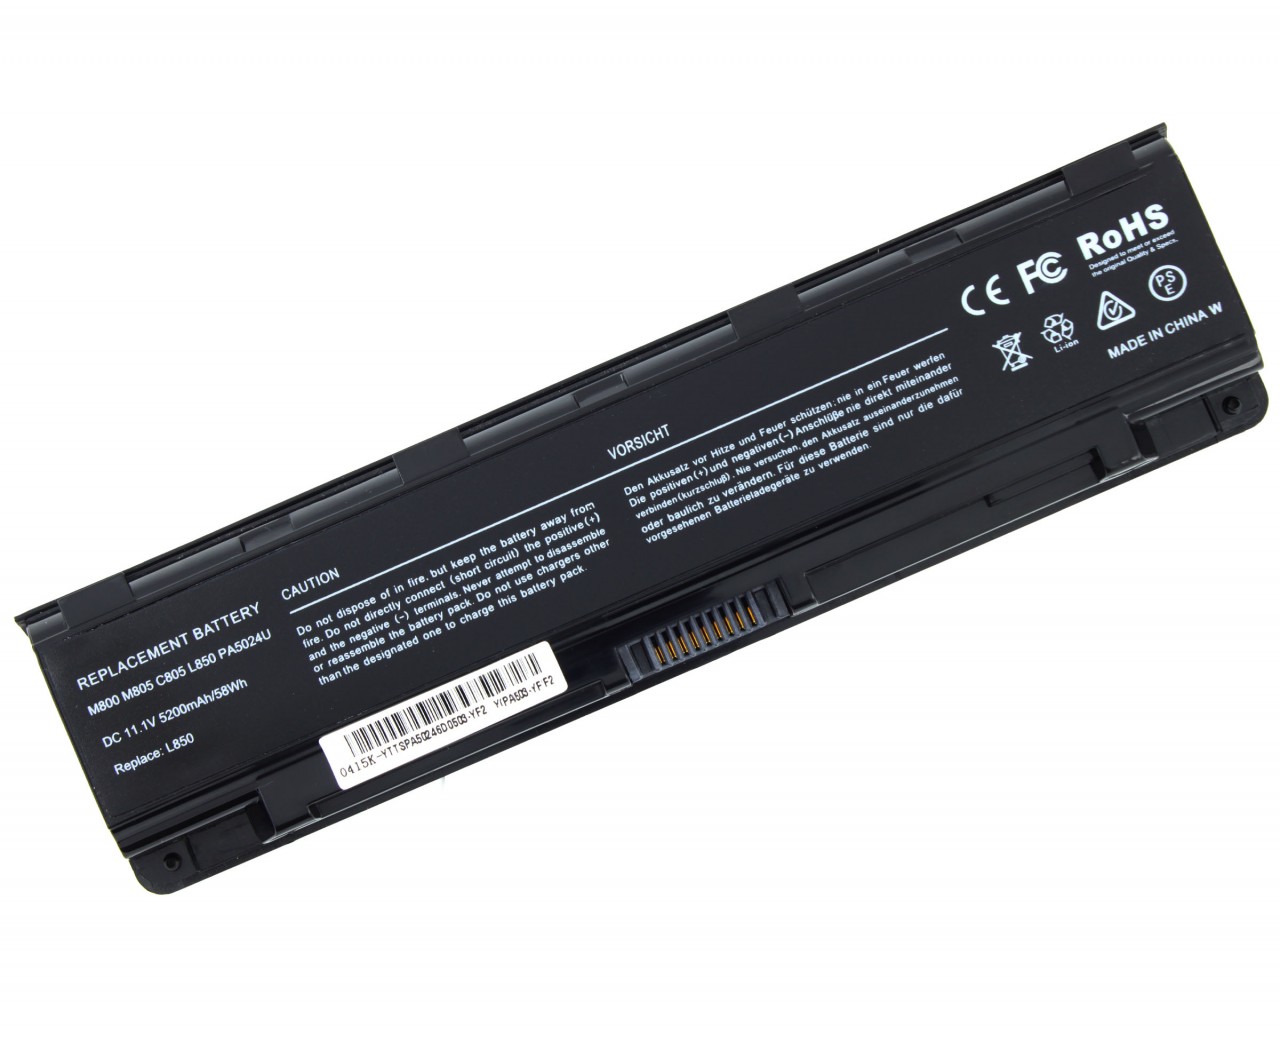 Baterie Toshiba Satellite S70t A 58 Wh / 5200 mAh image0